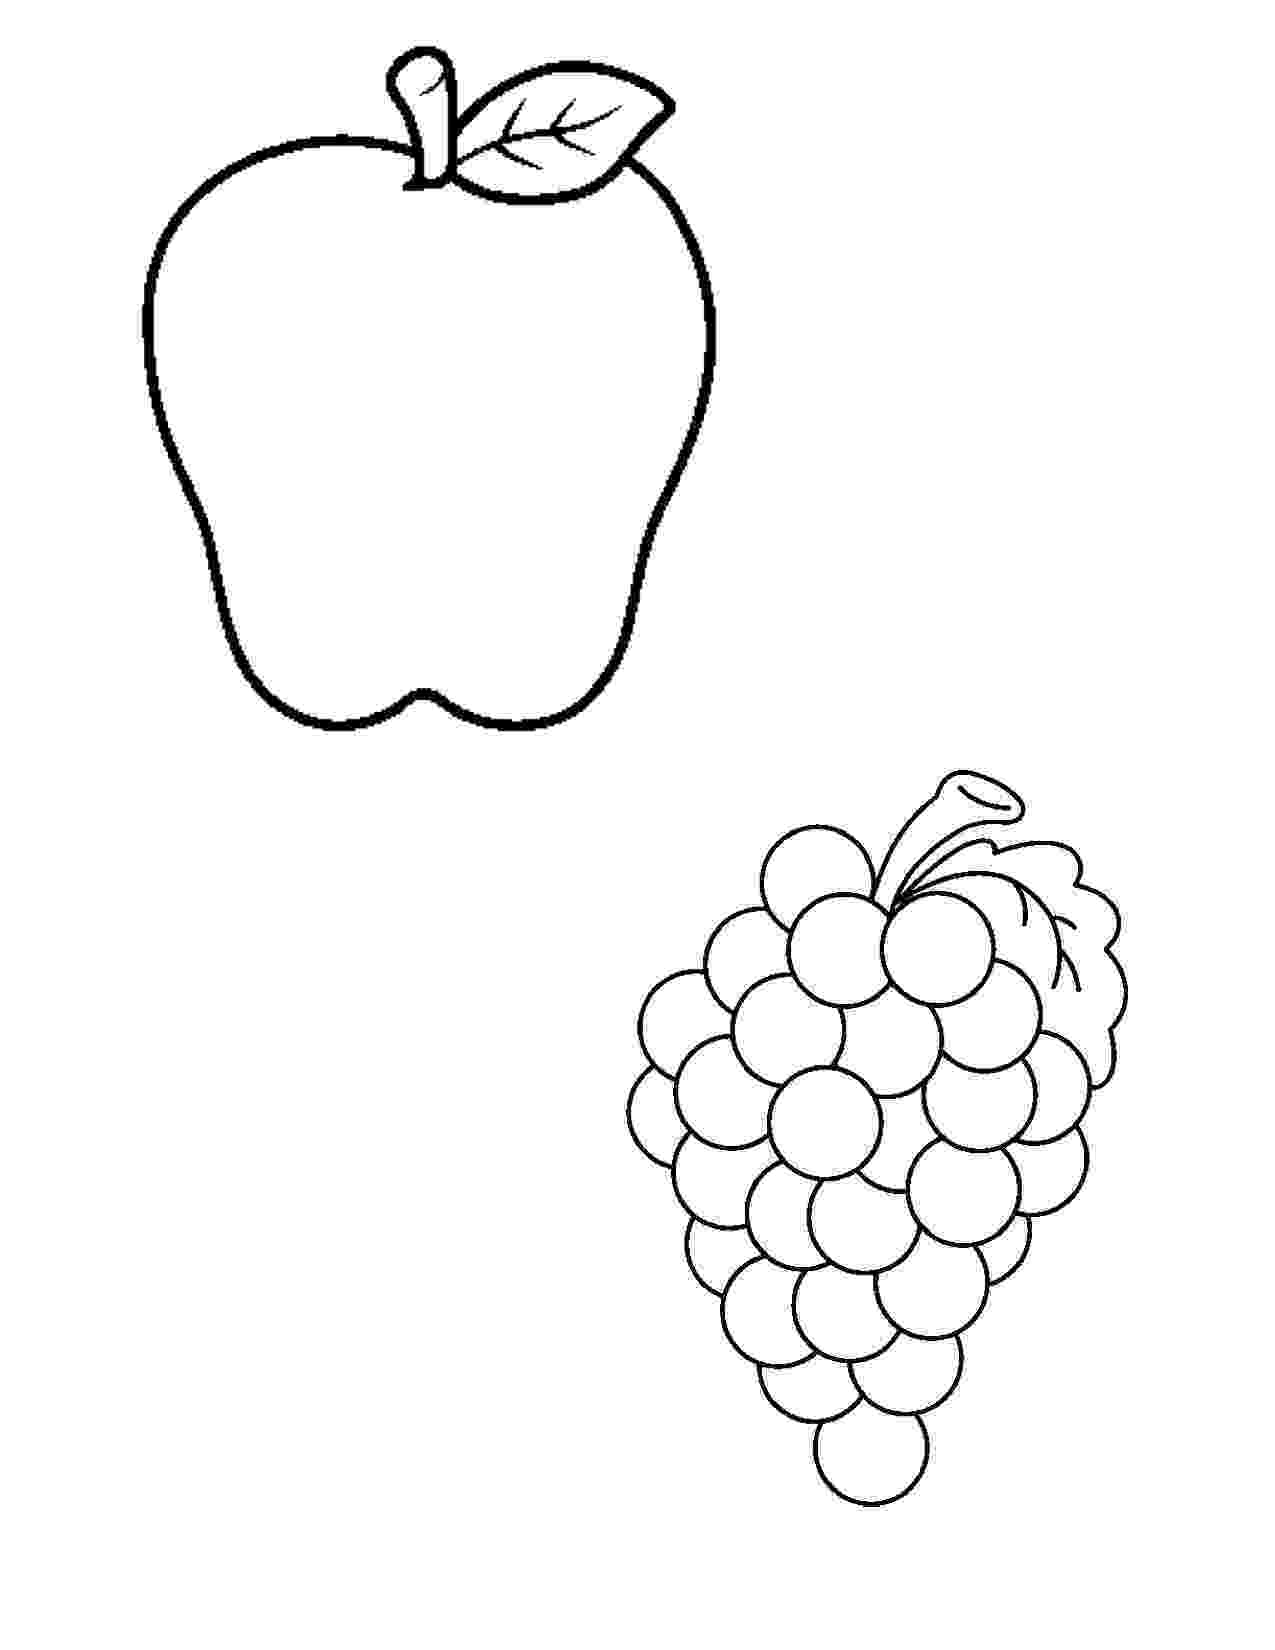 shapes of fruits to color best photos of fruit cutouts printable fruit cut out of fruits color to shapes 